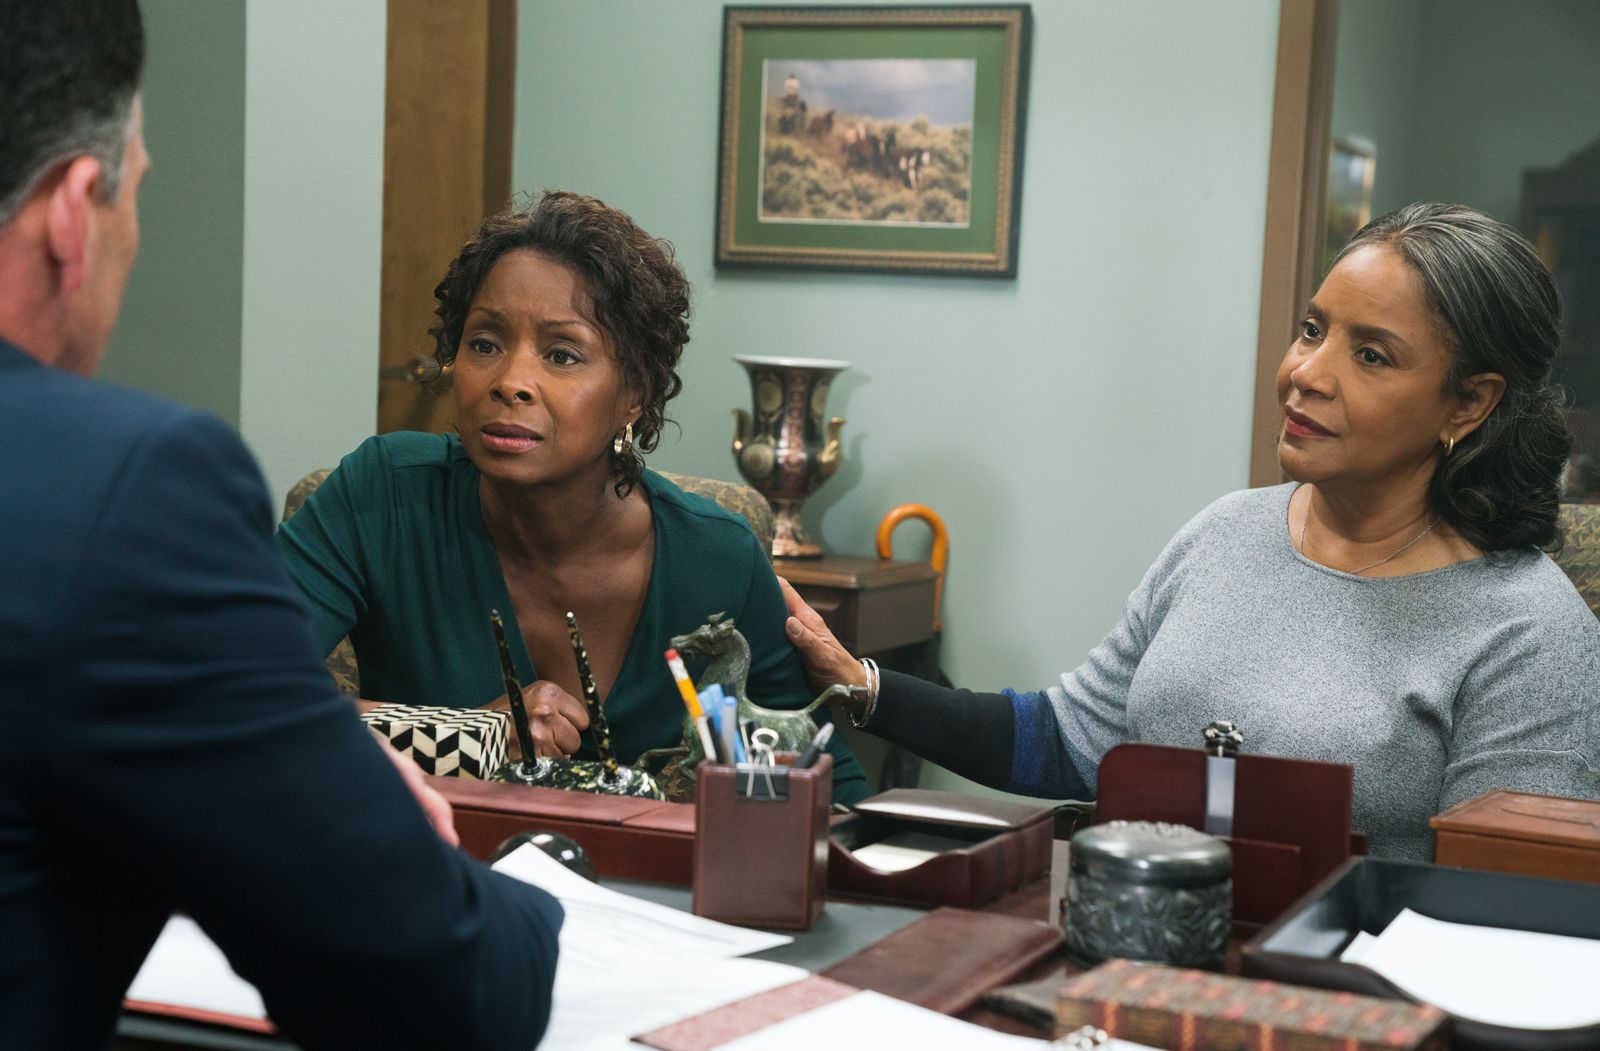 Crystal Fox and Phylicia Rashad talk to an attorney in a scene from Tyler Perry's A Fall From Grace